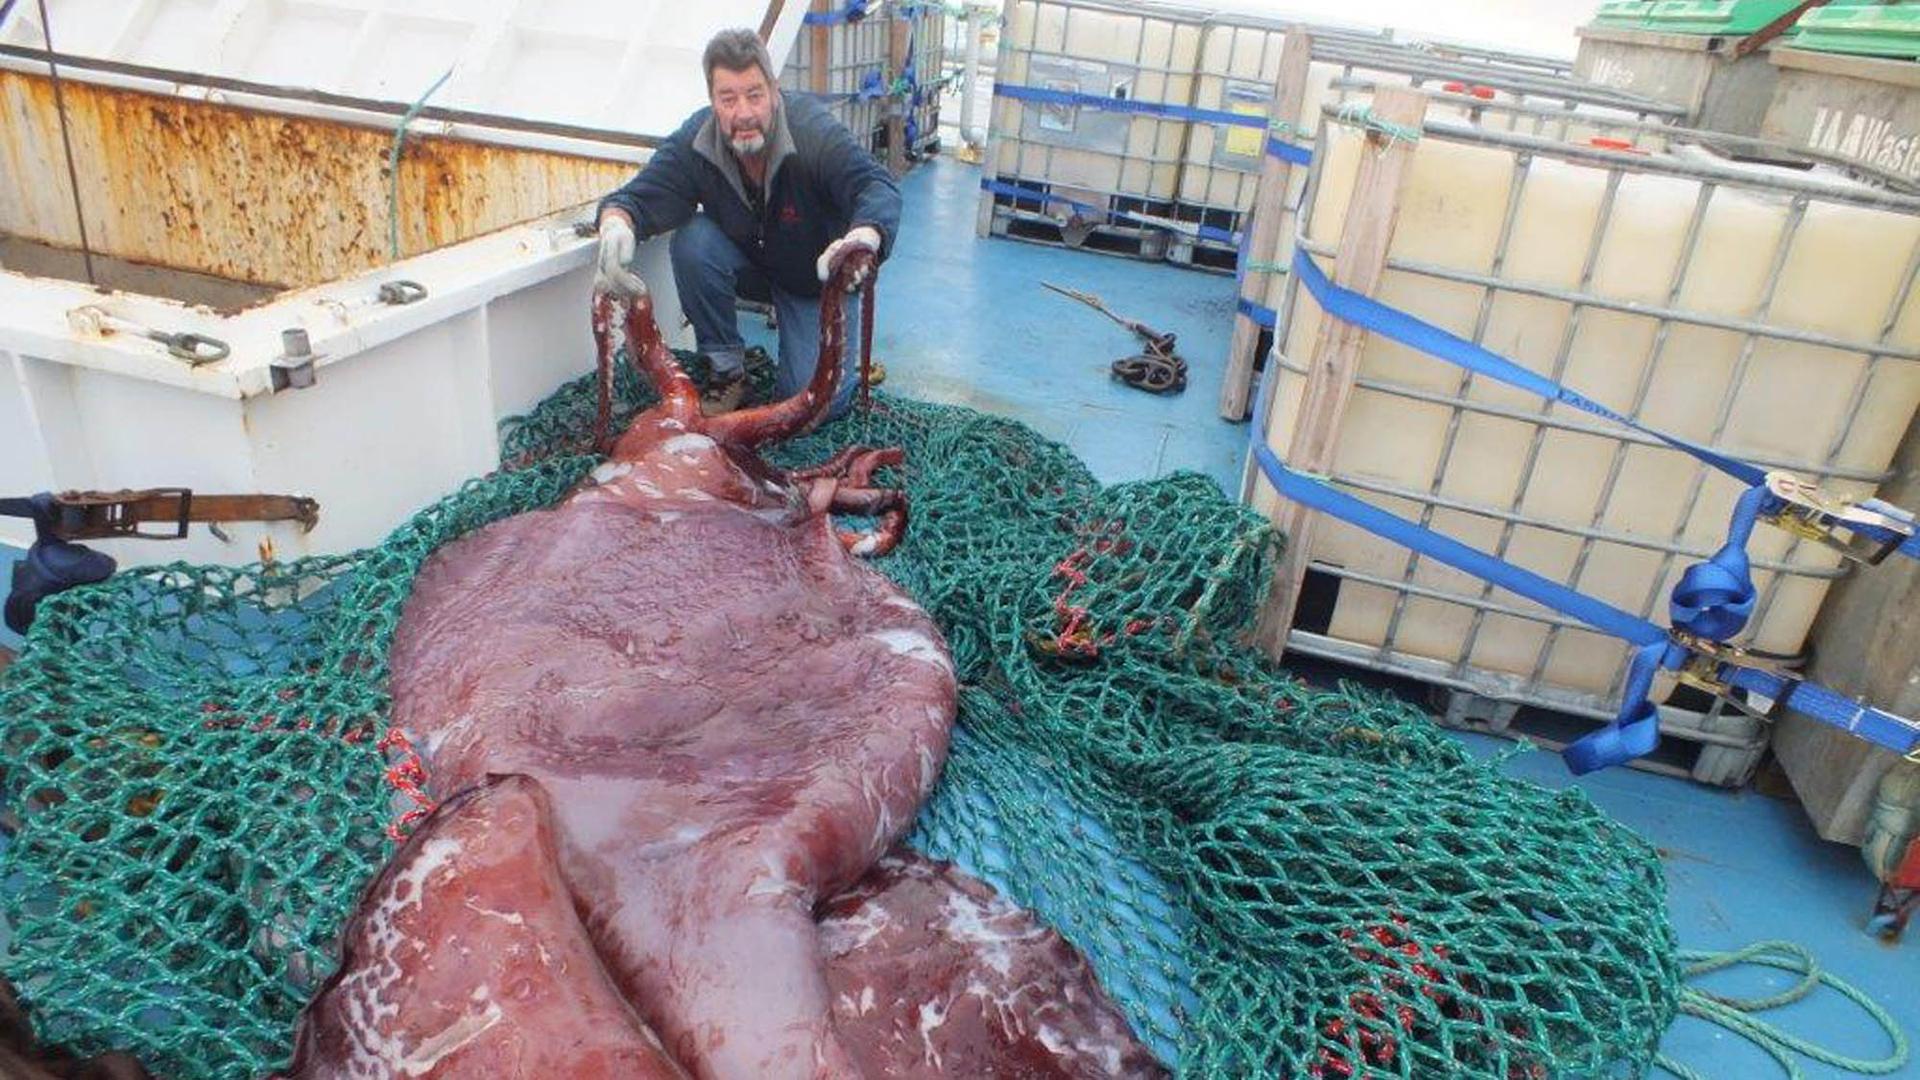 In this Dec. 2013 photo provided by a crew member of the boat San Aspring of New Zealand fishing company Sanford, Capt. John Bennett shows a colossal squid he and and his crew caught on the boat in Antarctica's remote Ross Sea. The creature was caught a m